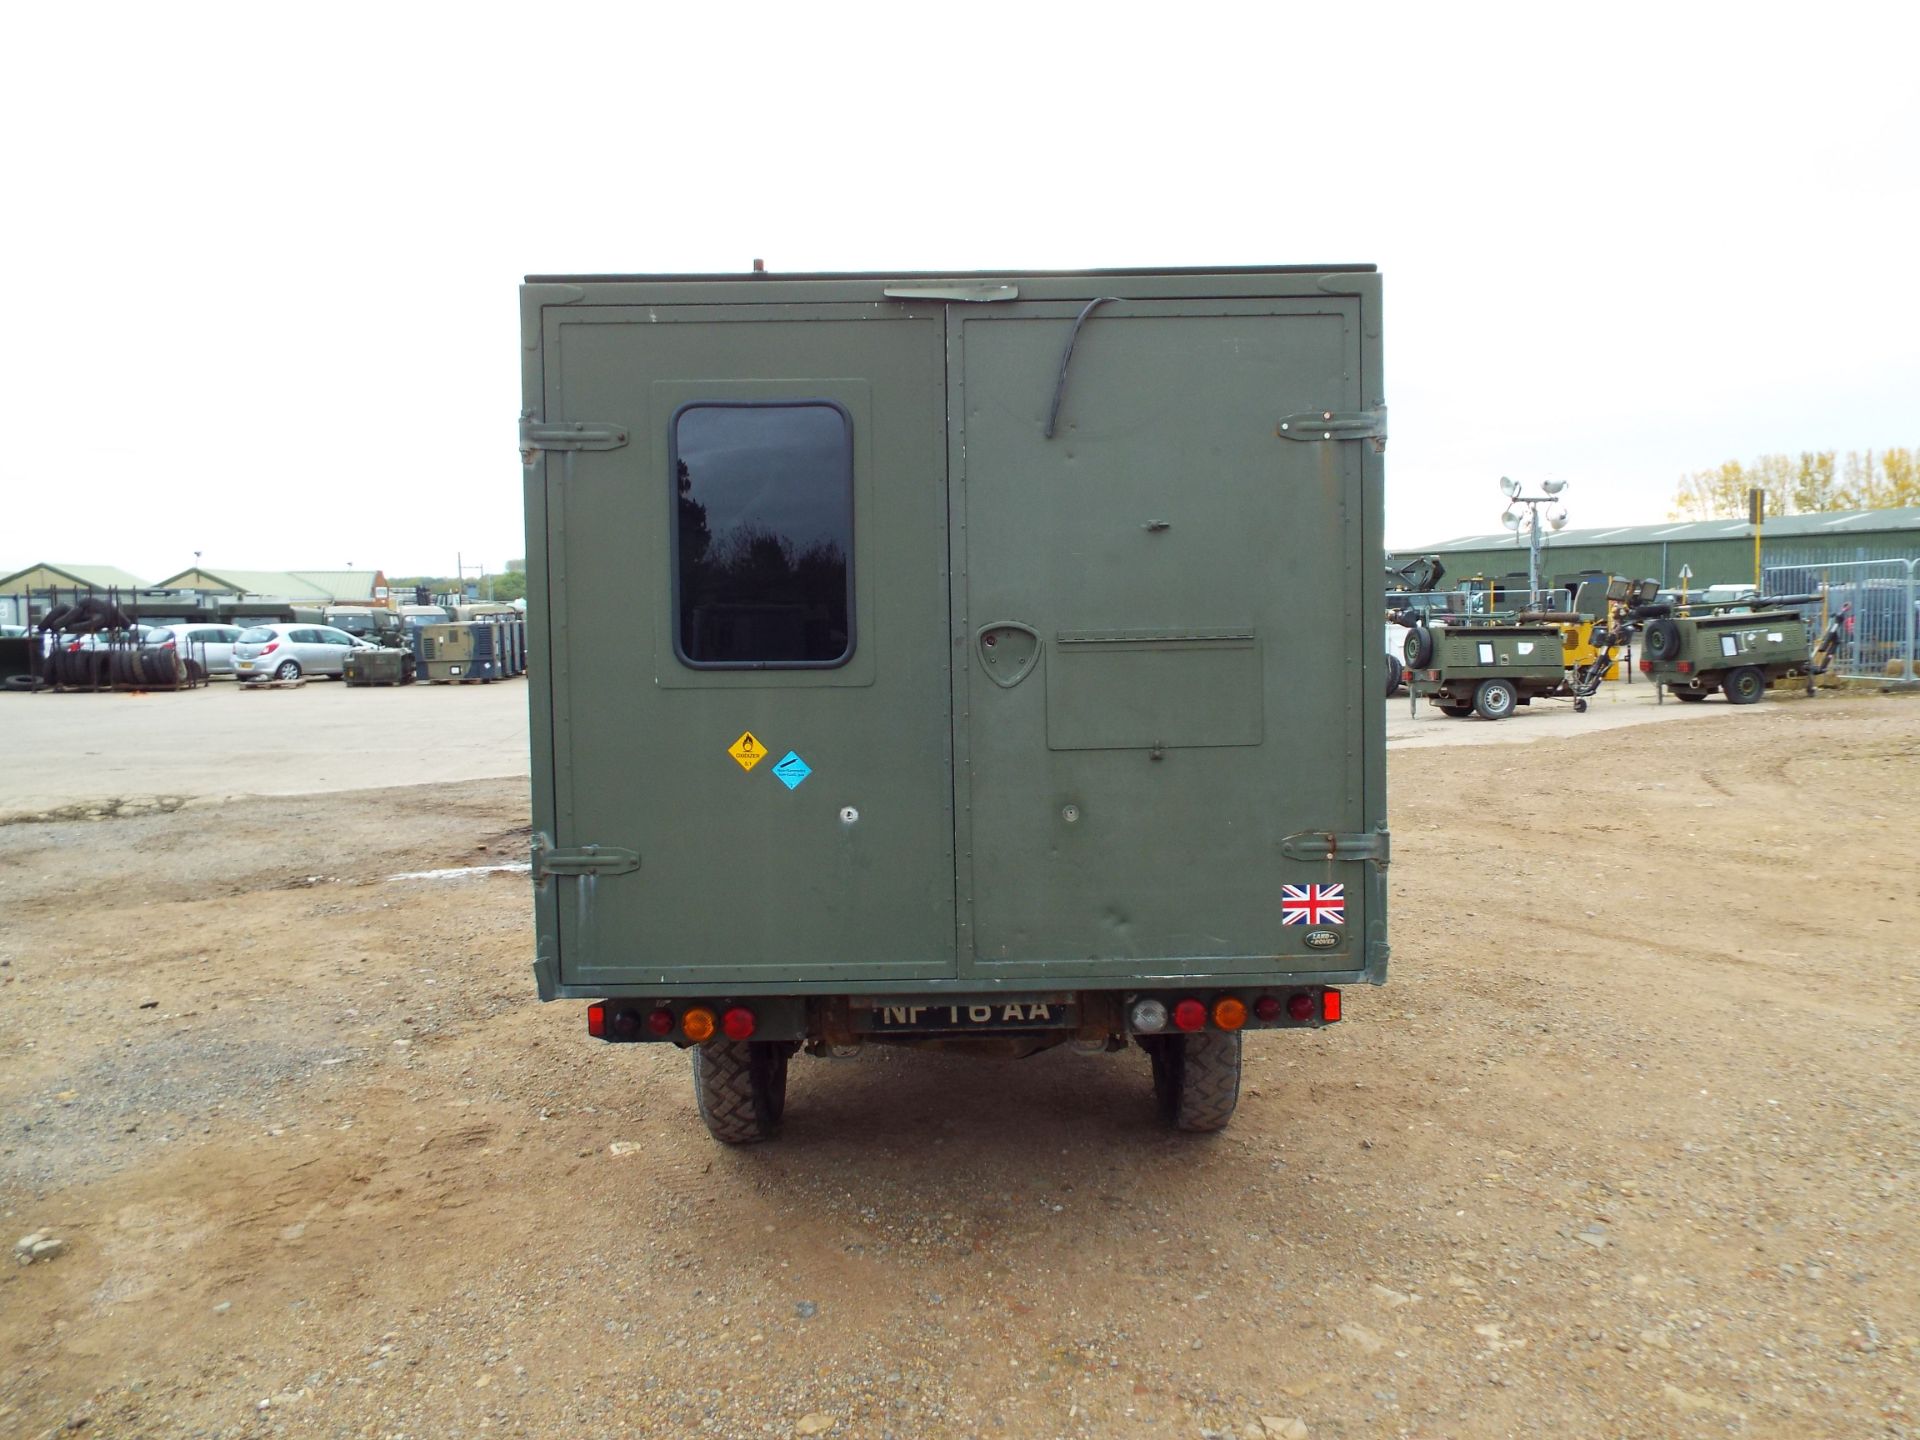 Military Specification Land Rover Wolf 130 ambulance - Image 6 of 28